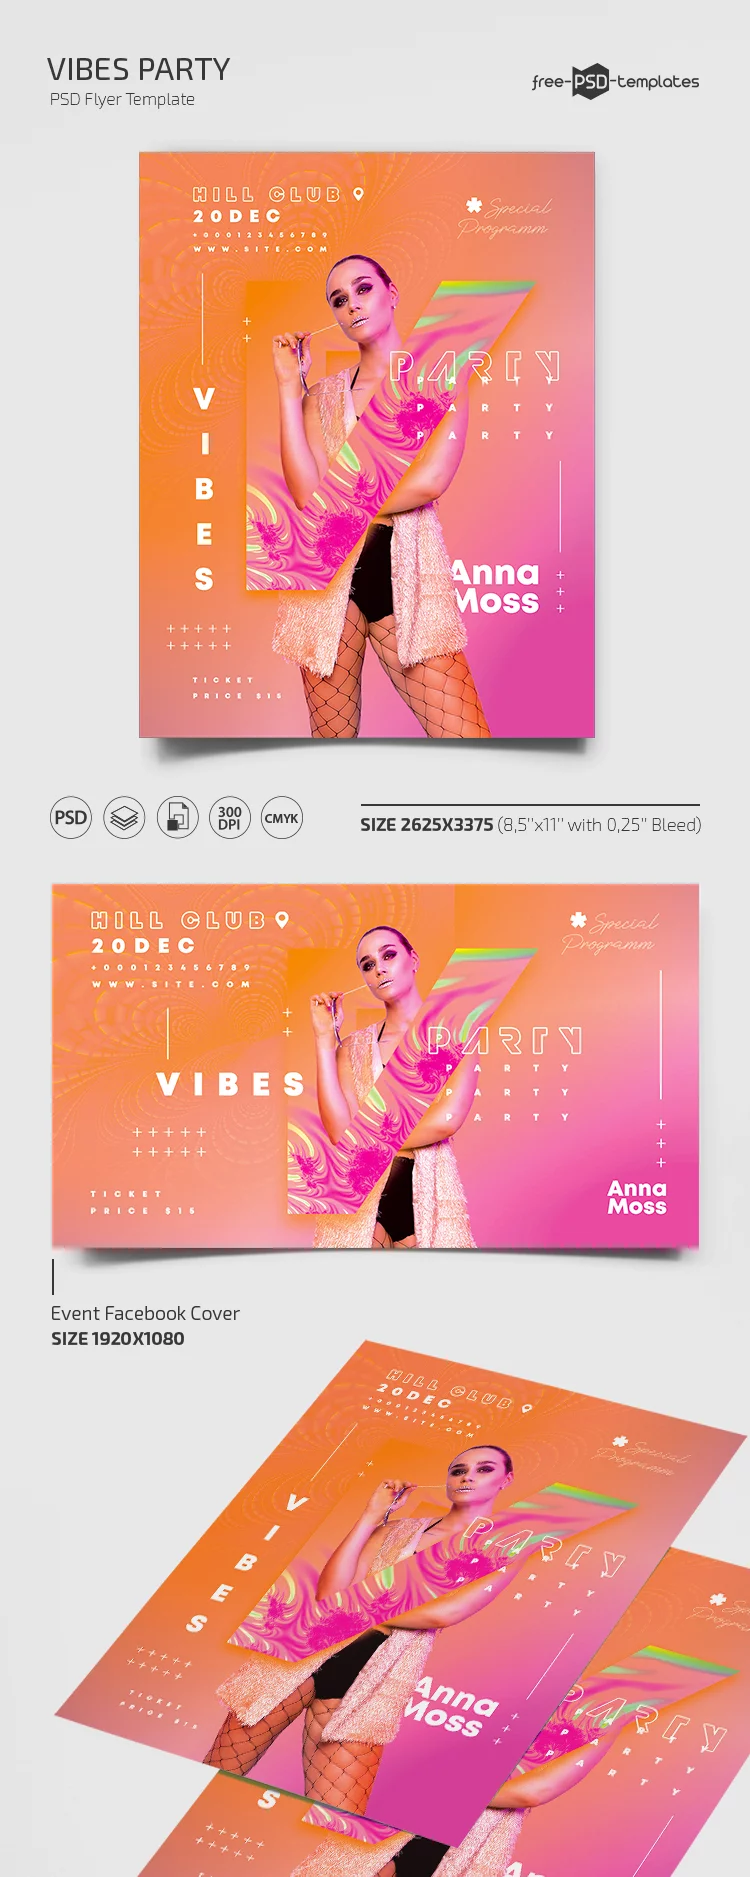 Free Vibes Party Flyer Template in PSD